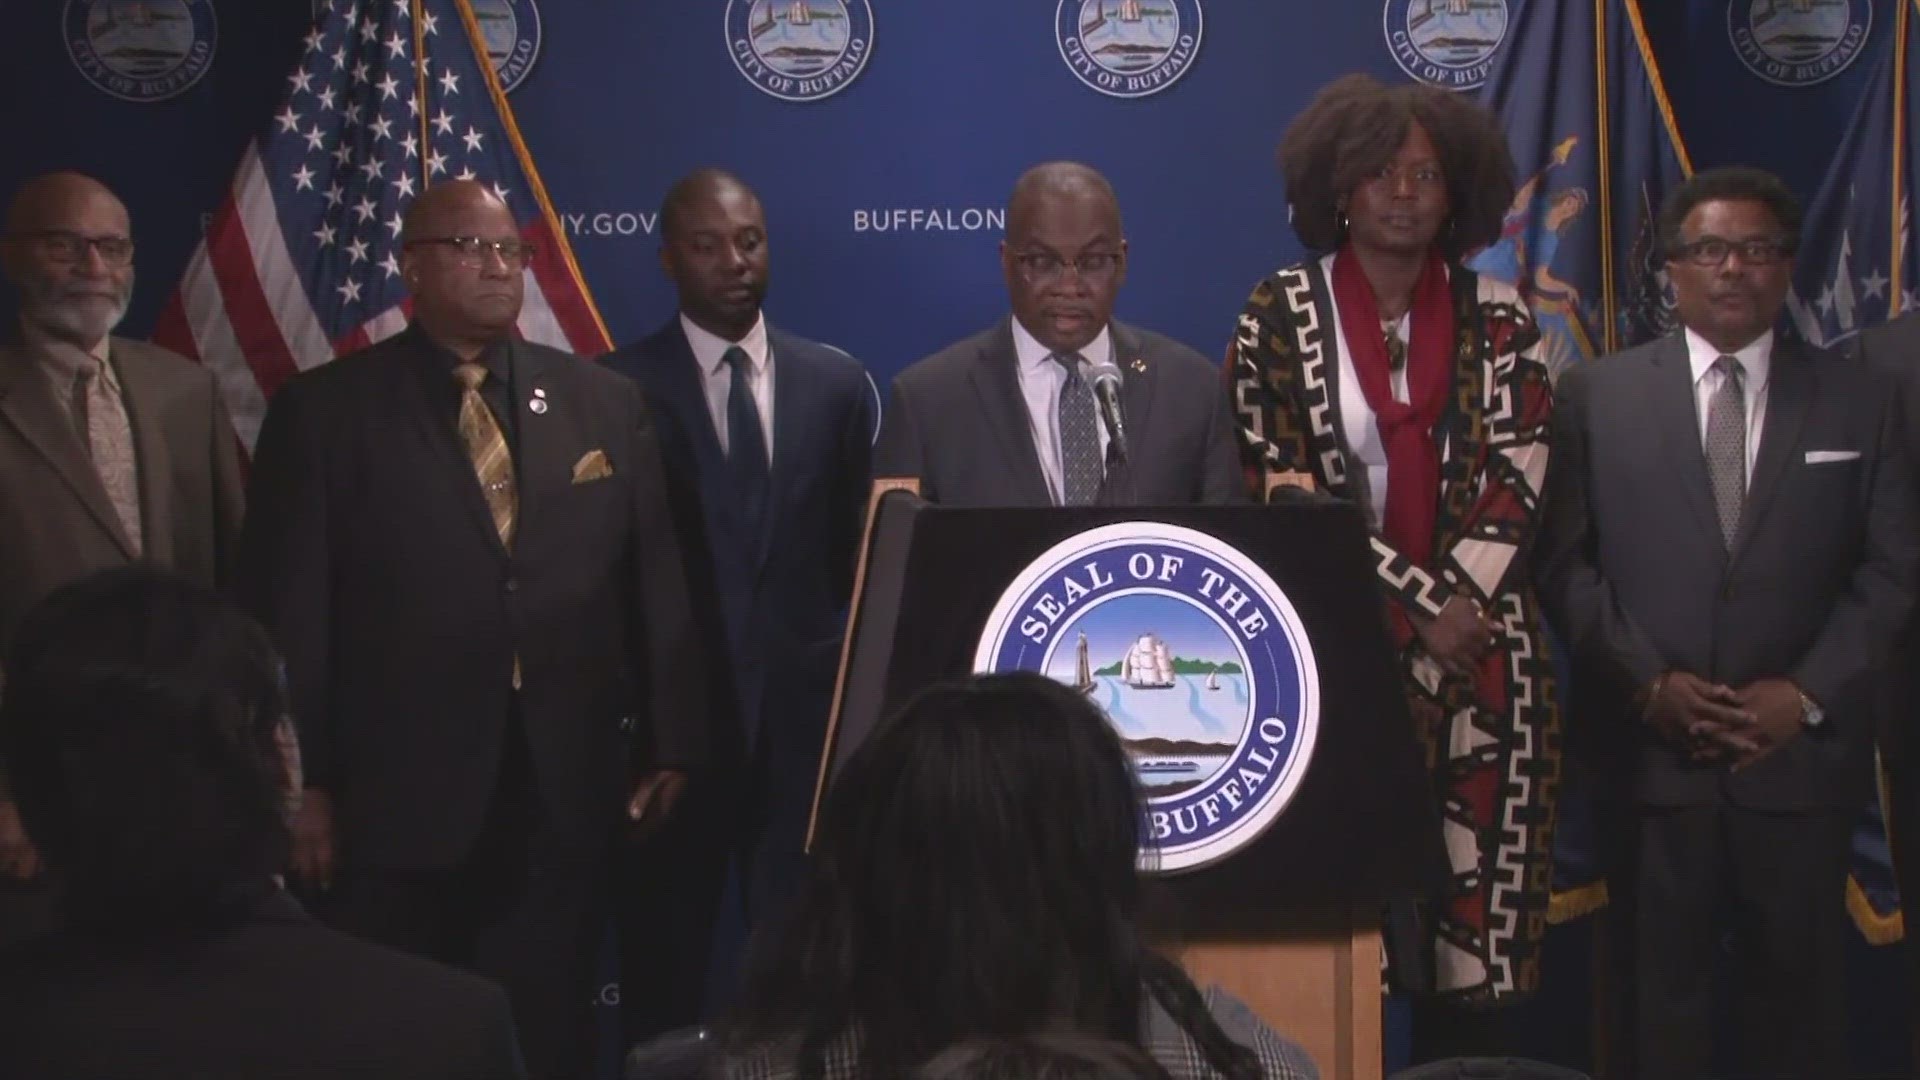 Buffalo Mayor Byron Brown announces finalists for Tops 5/14 memorial designs